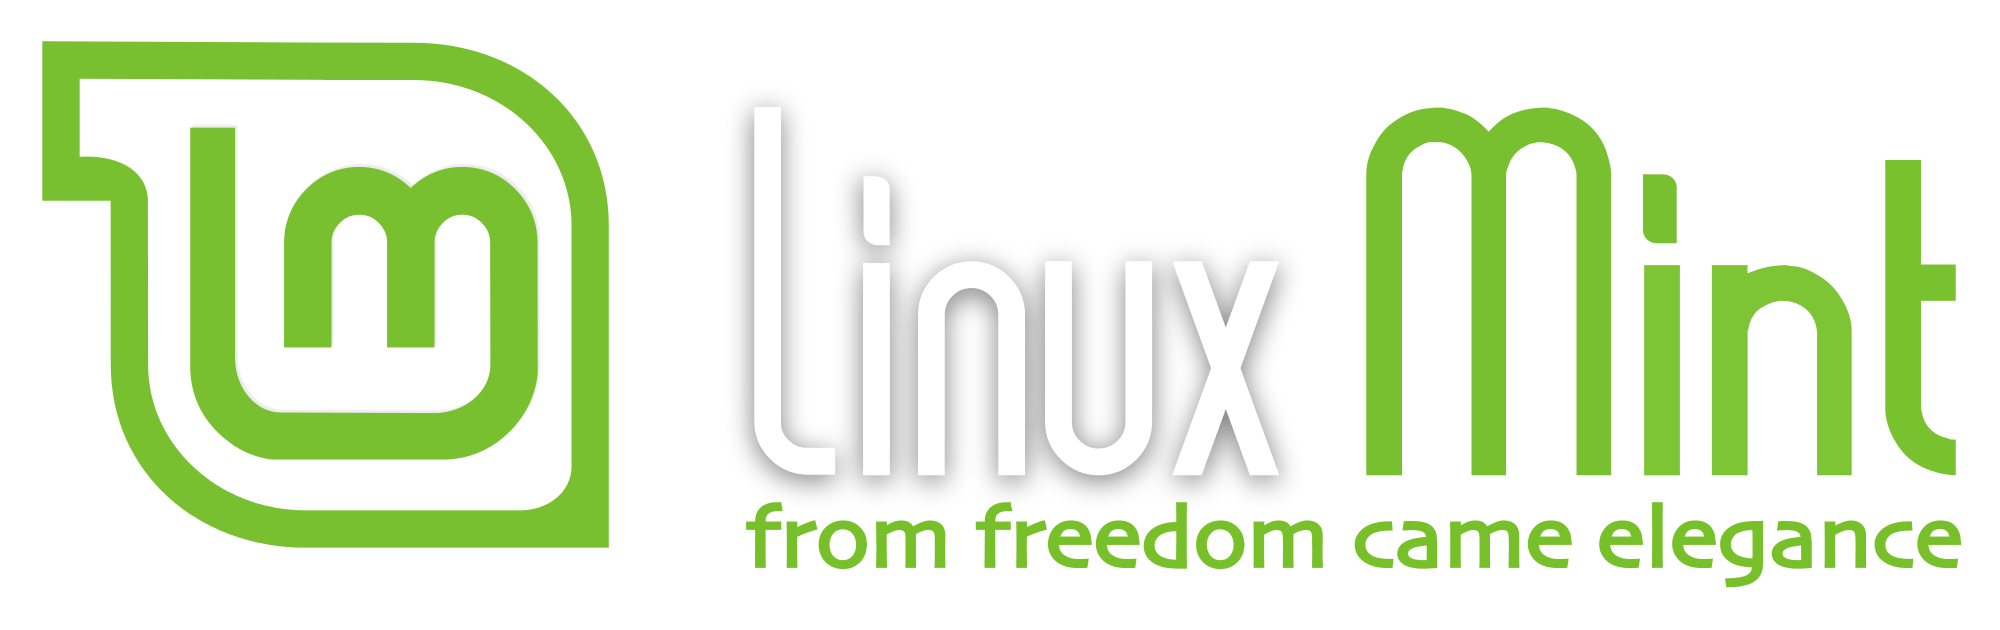 Linux Mint Logo - File:Linux Mint logo submission.svg - Wikimedia Commons